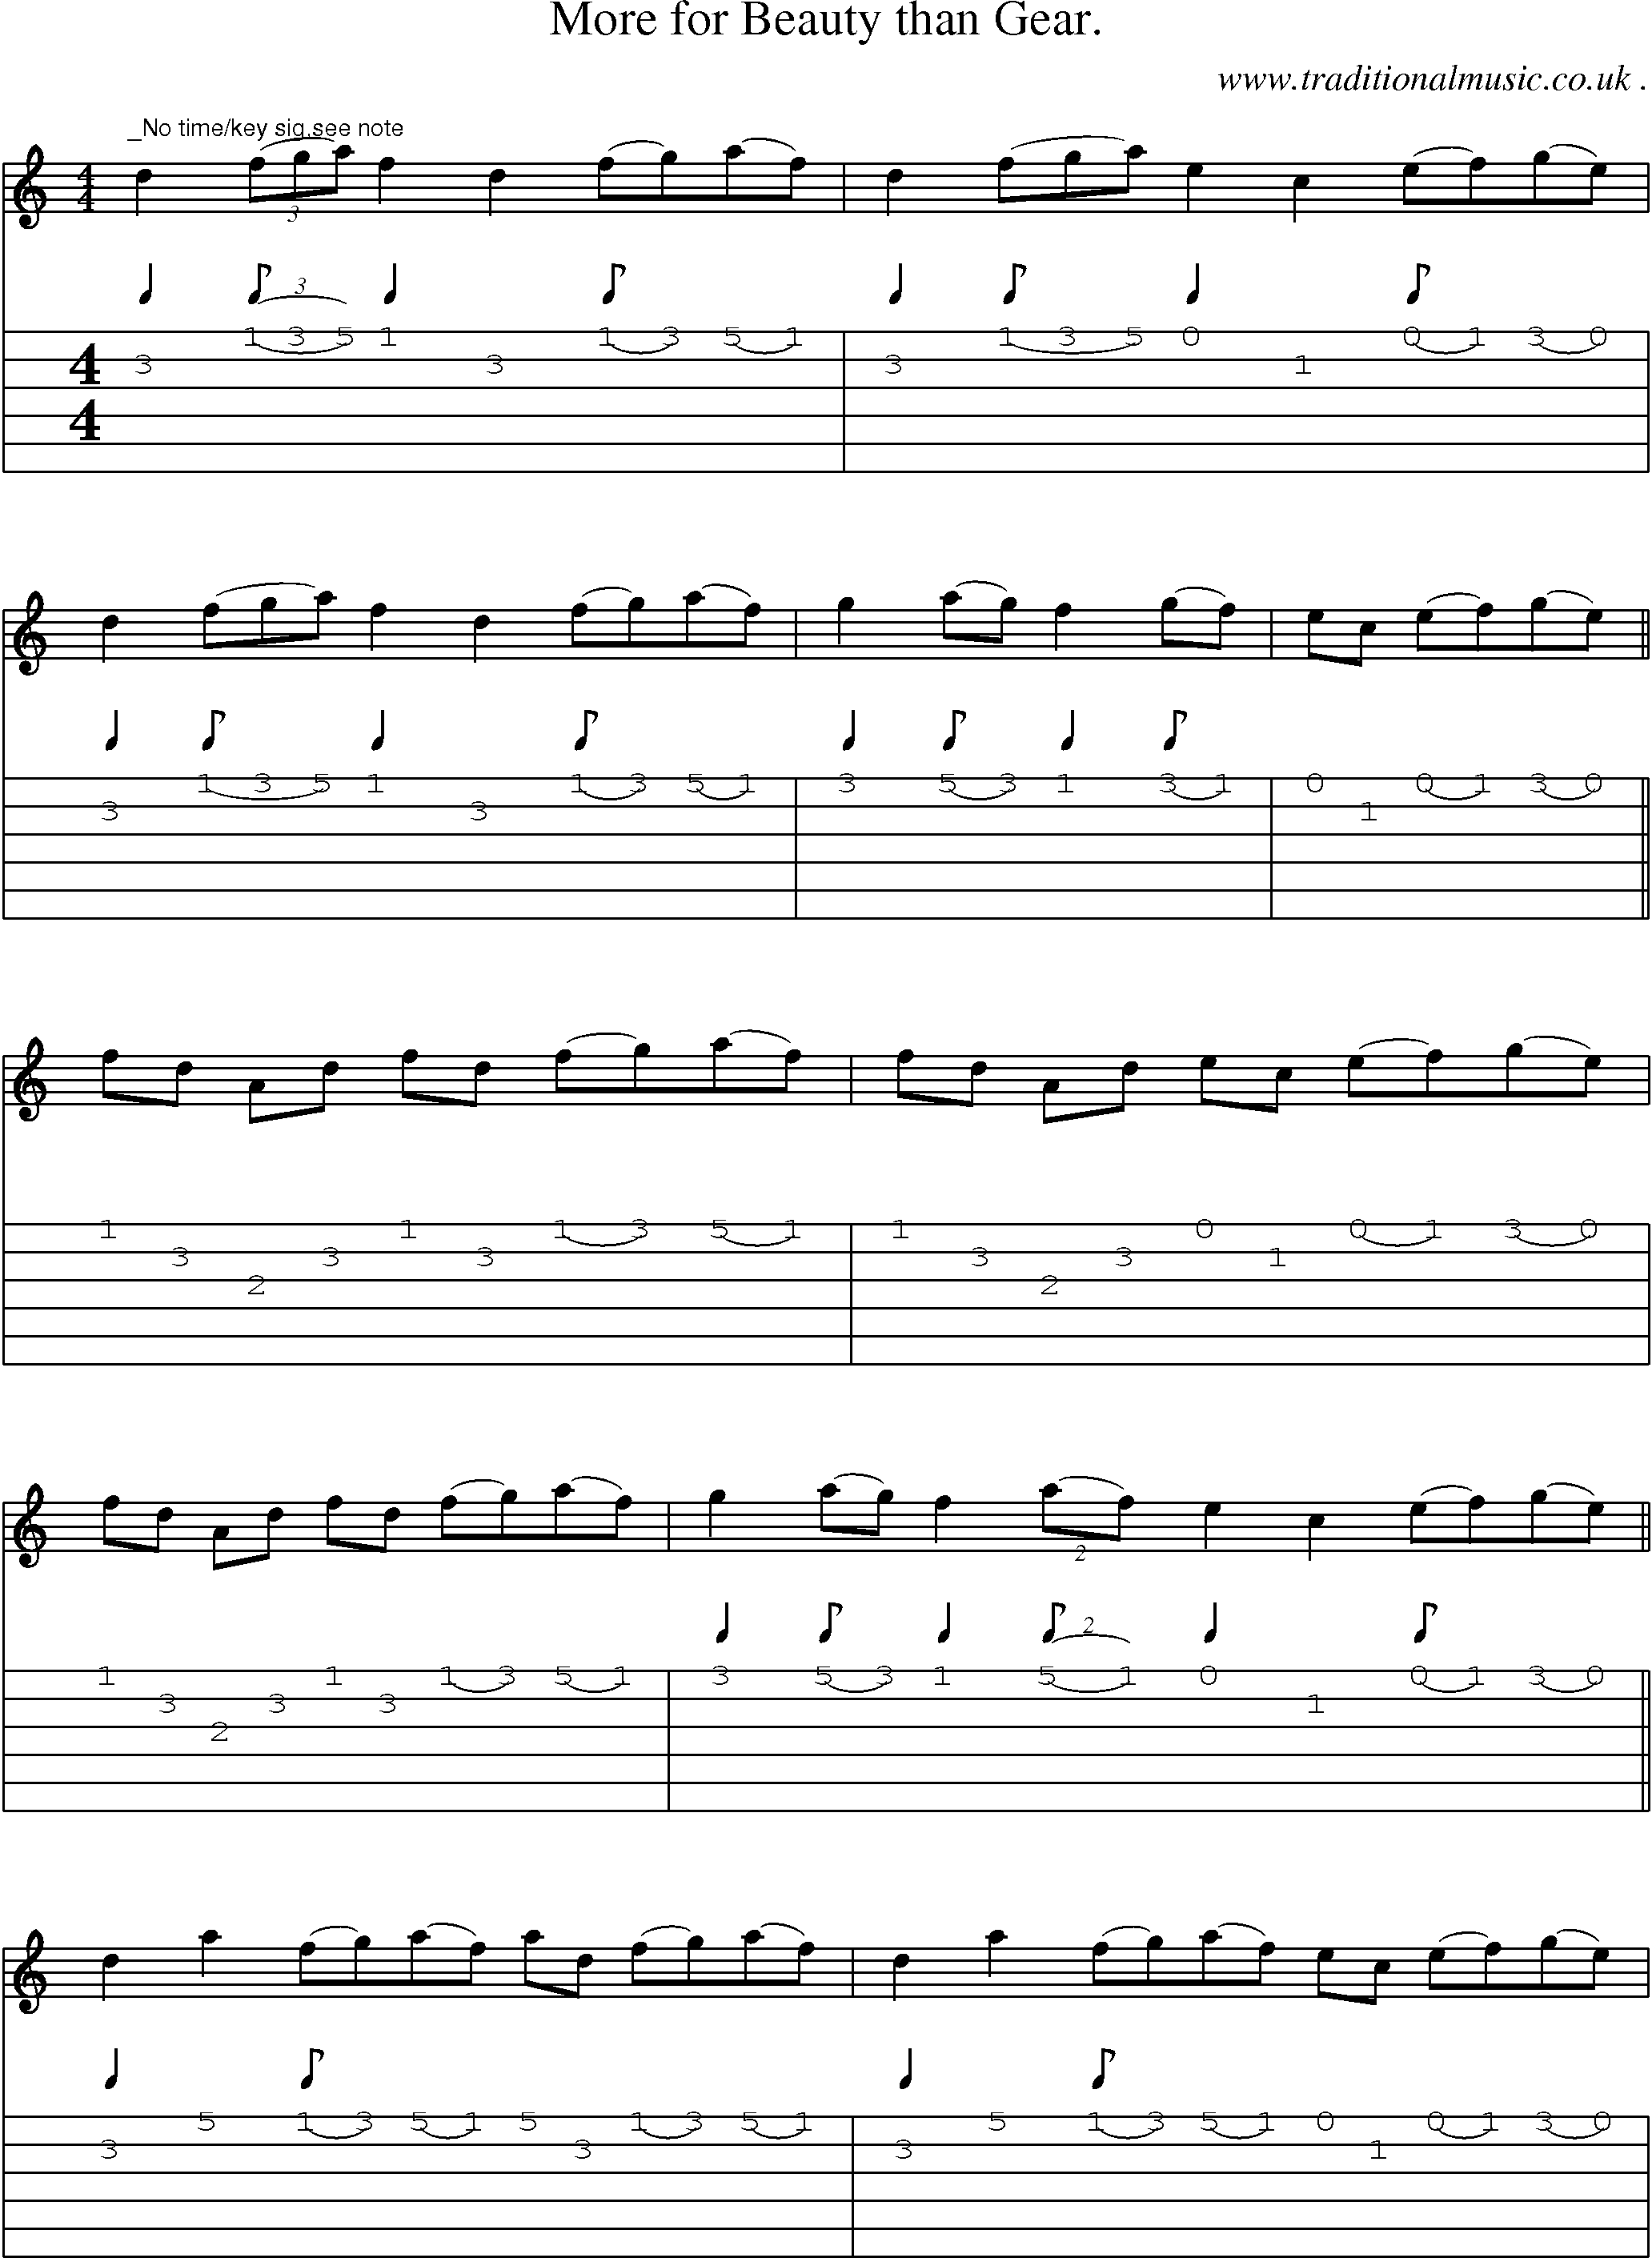 Sheet-Music and Guitar Tabs for More For Beauty Than Gear